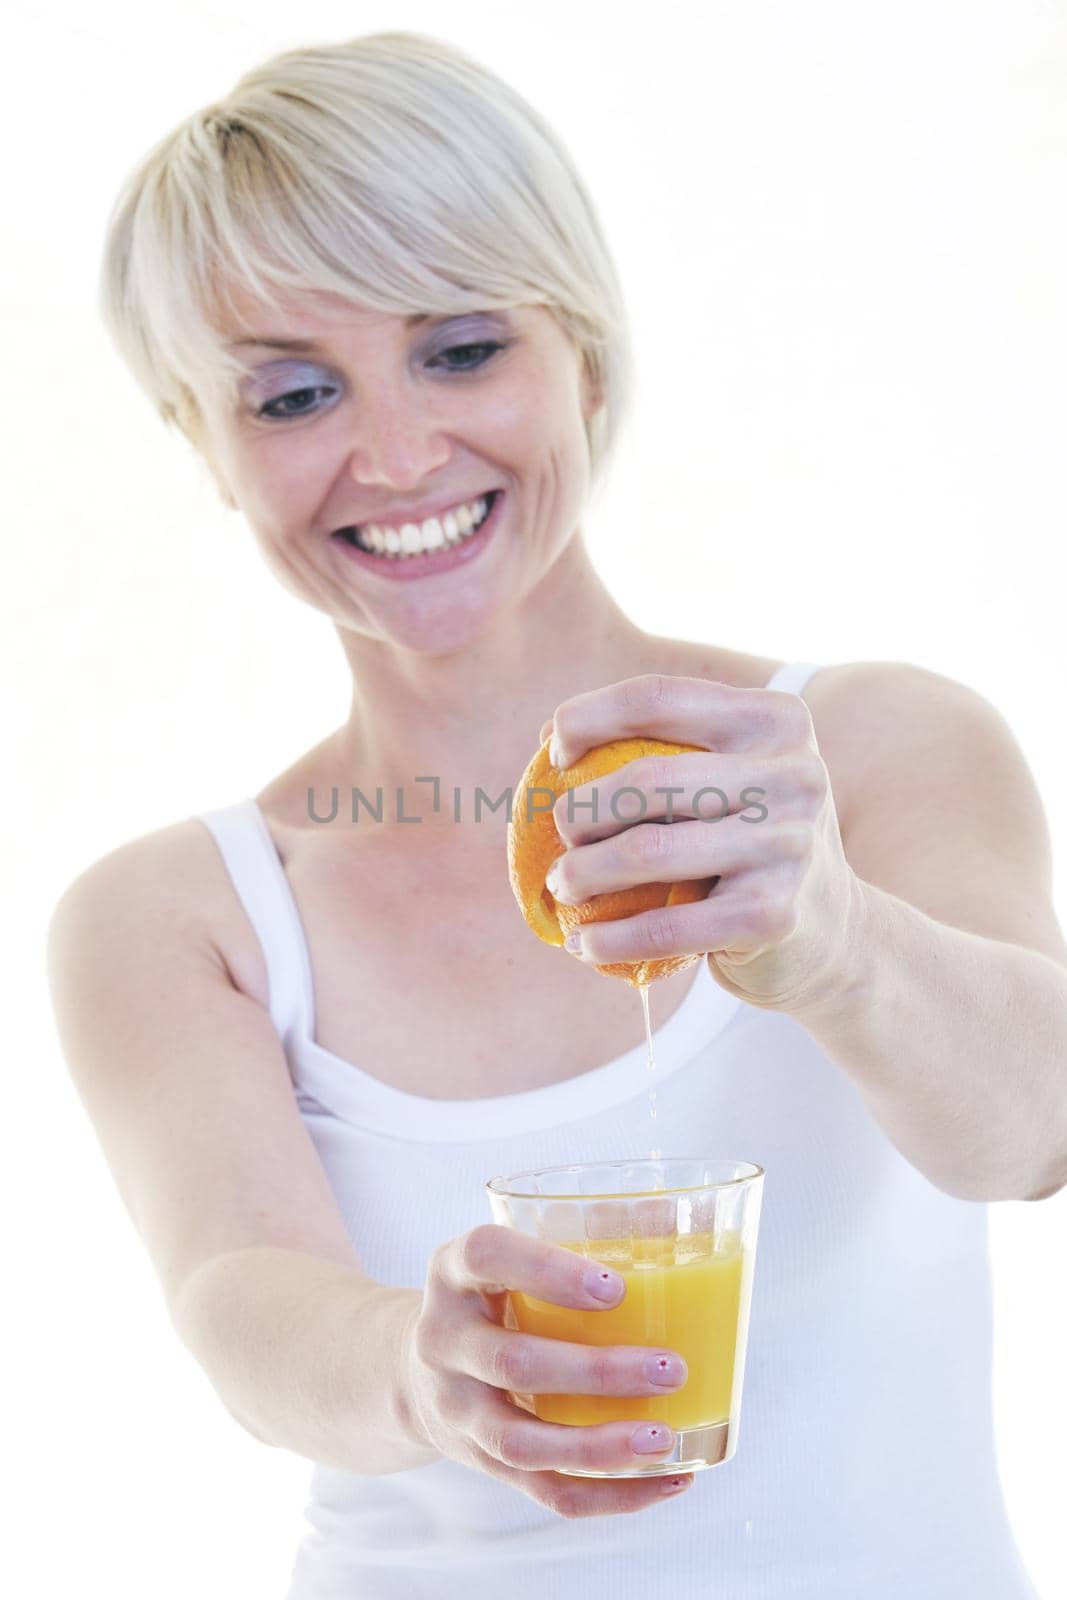 woman squeeze fresh orange juice drink  isolated over white background